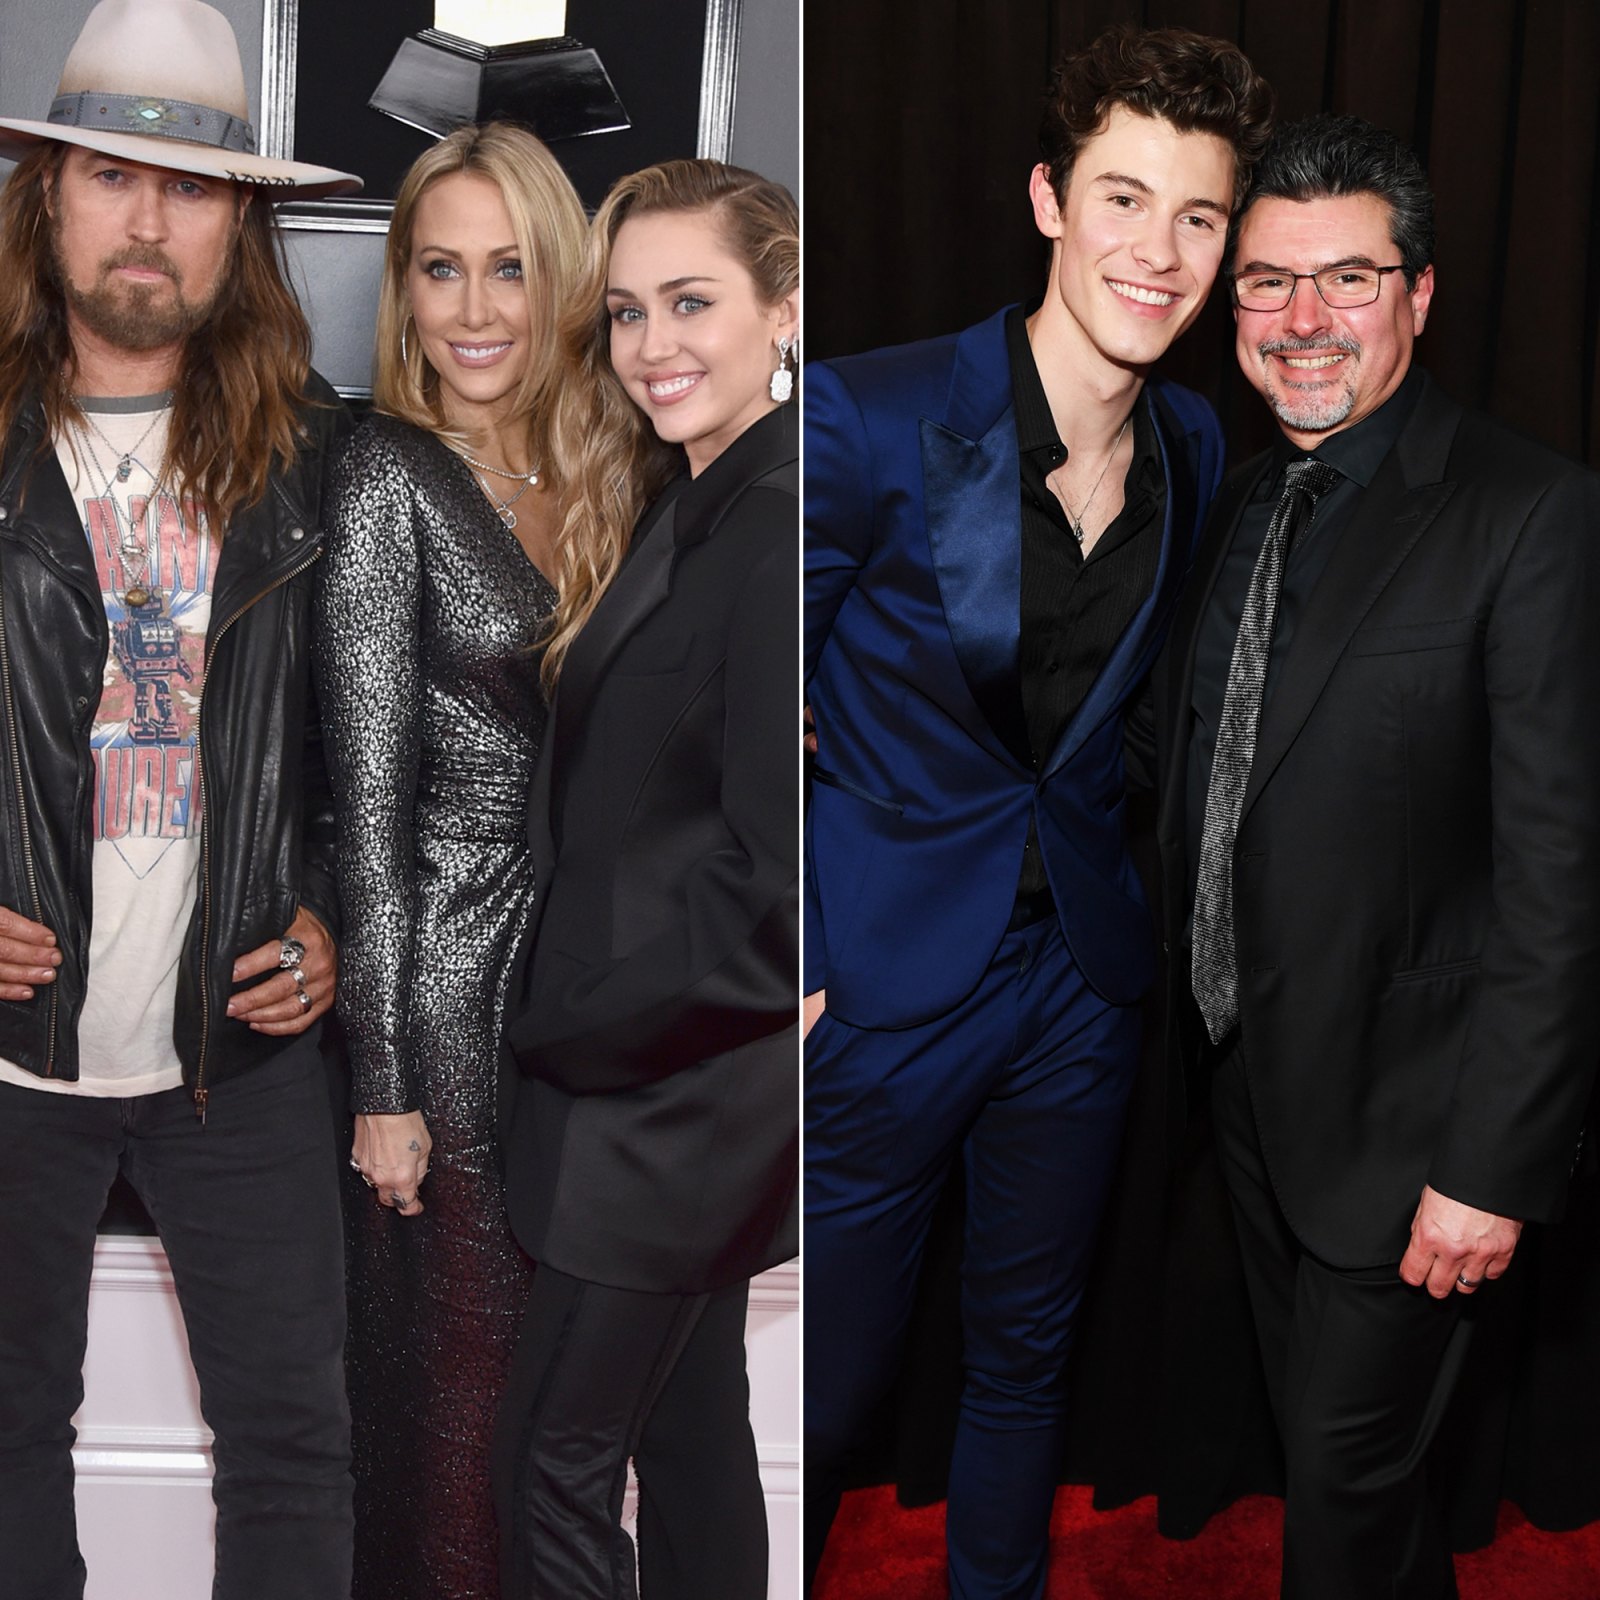 Grammys 2019: Shawn Mendes, Miley Cyrus and More Stars Who Brought Family Members as Dates